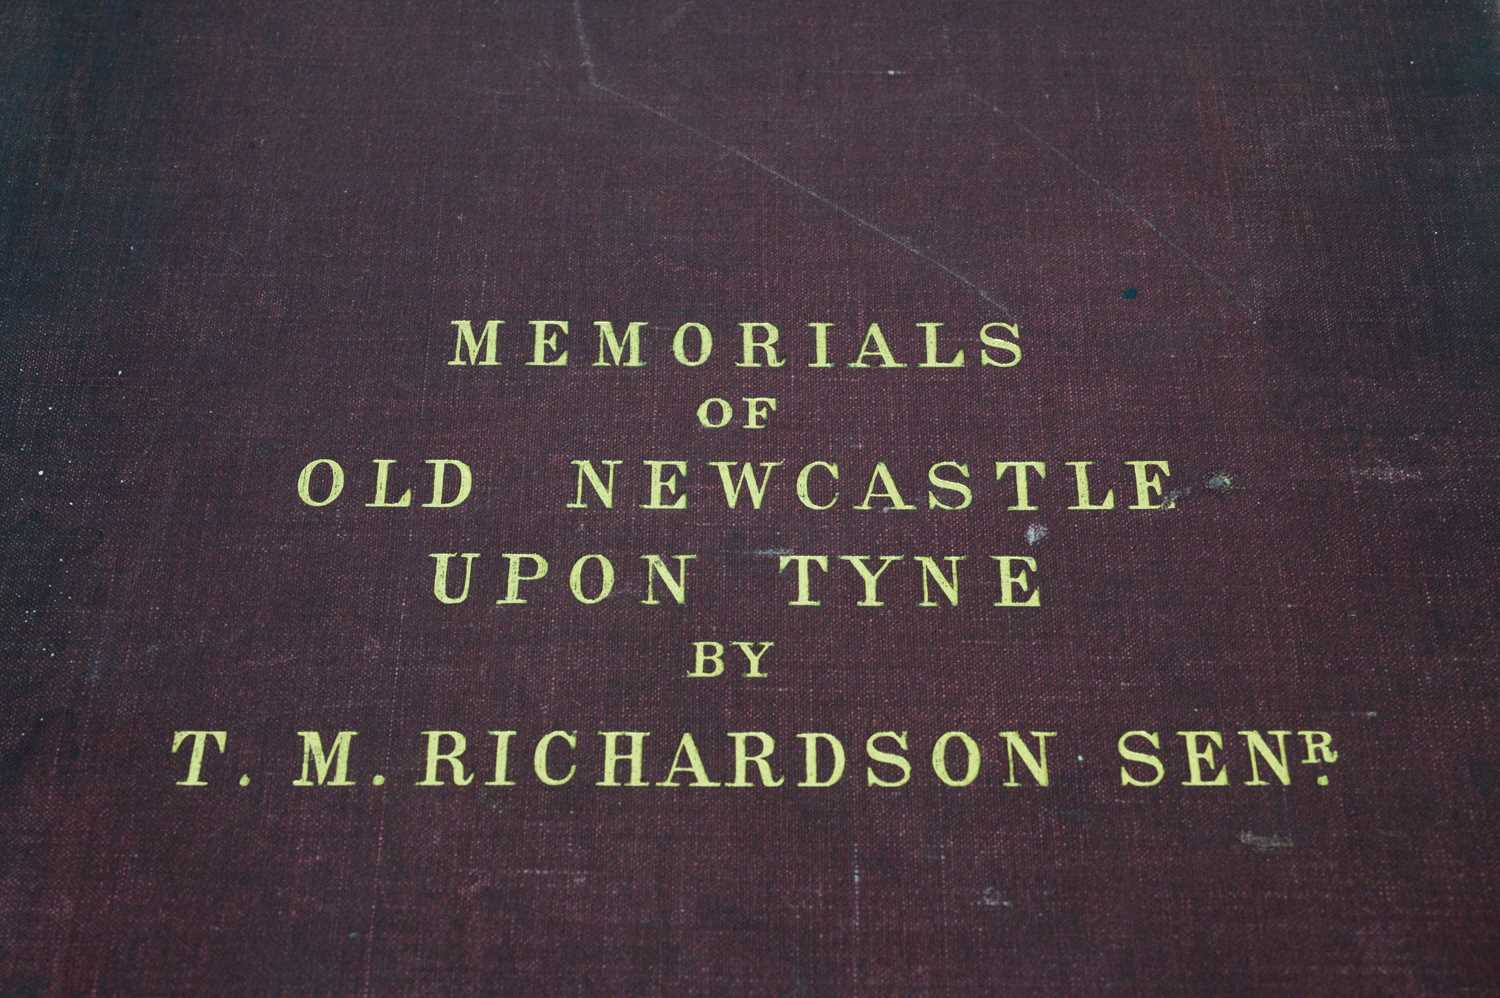 Richardson (T.M. snr.) Memorials of Old Newcastle upon Tyne, - Image 2 of 4